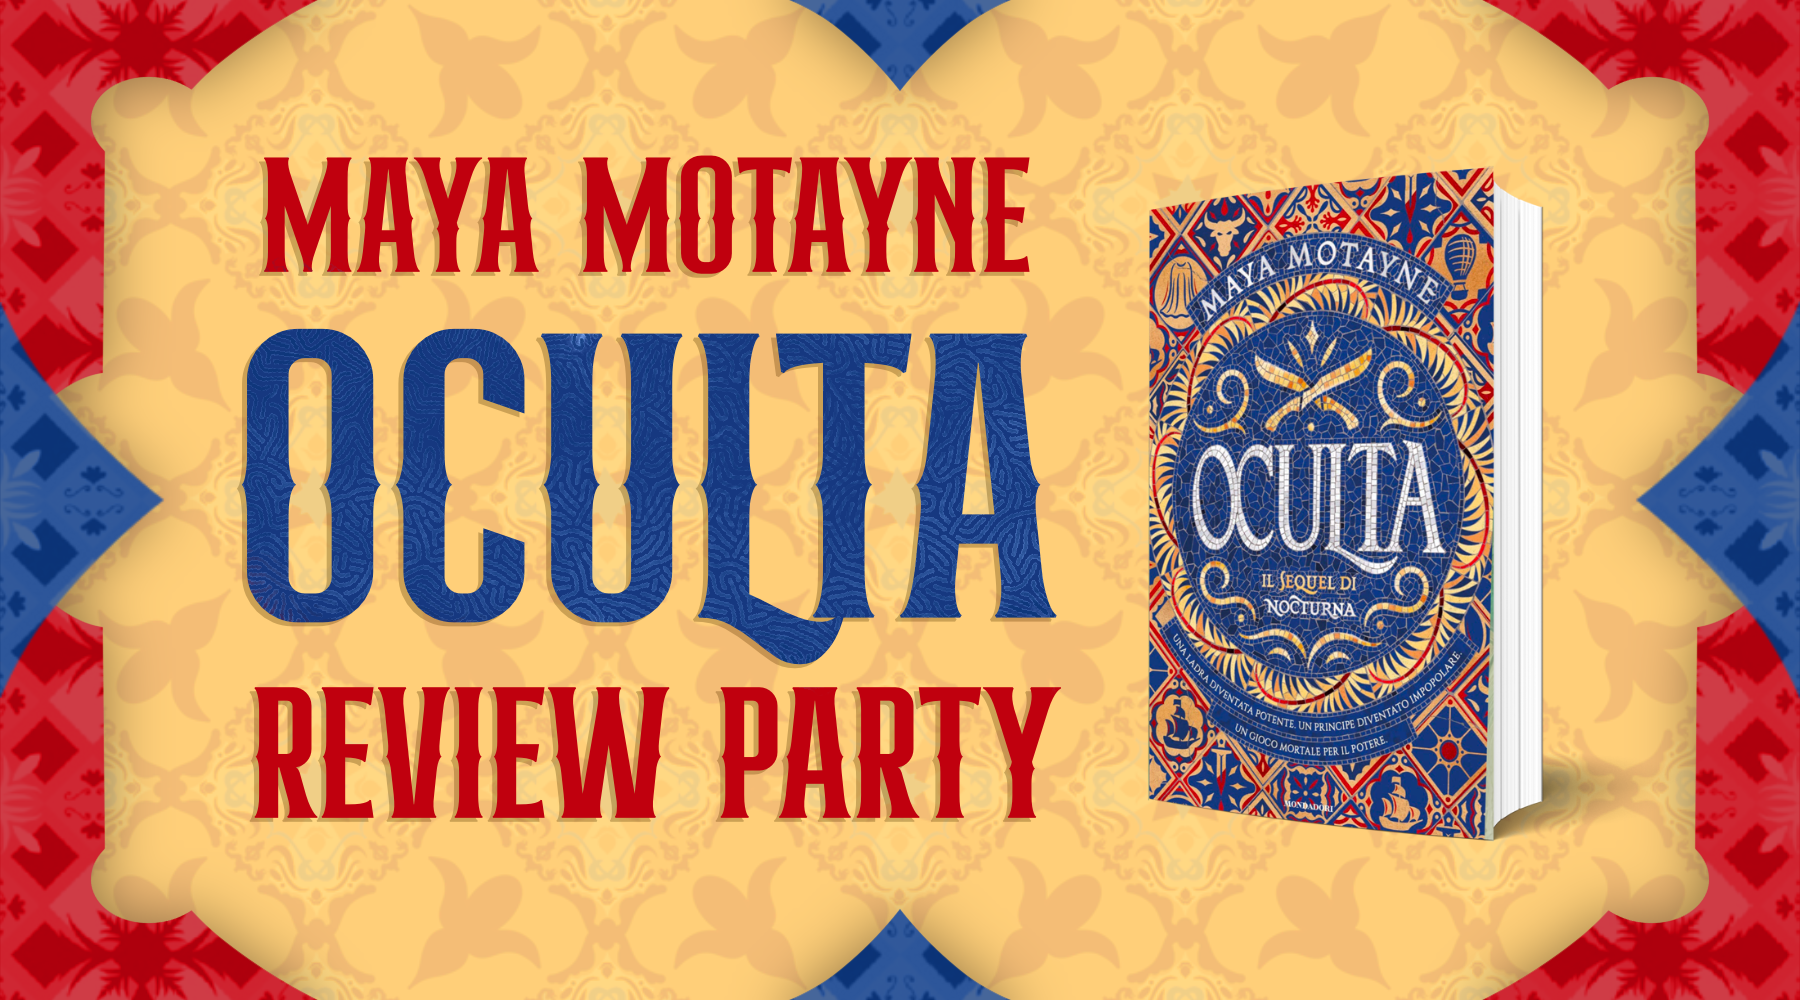 Review Party: Oculta, Maya Montaine